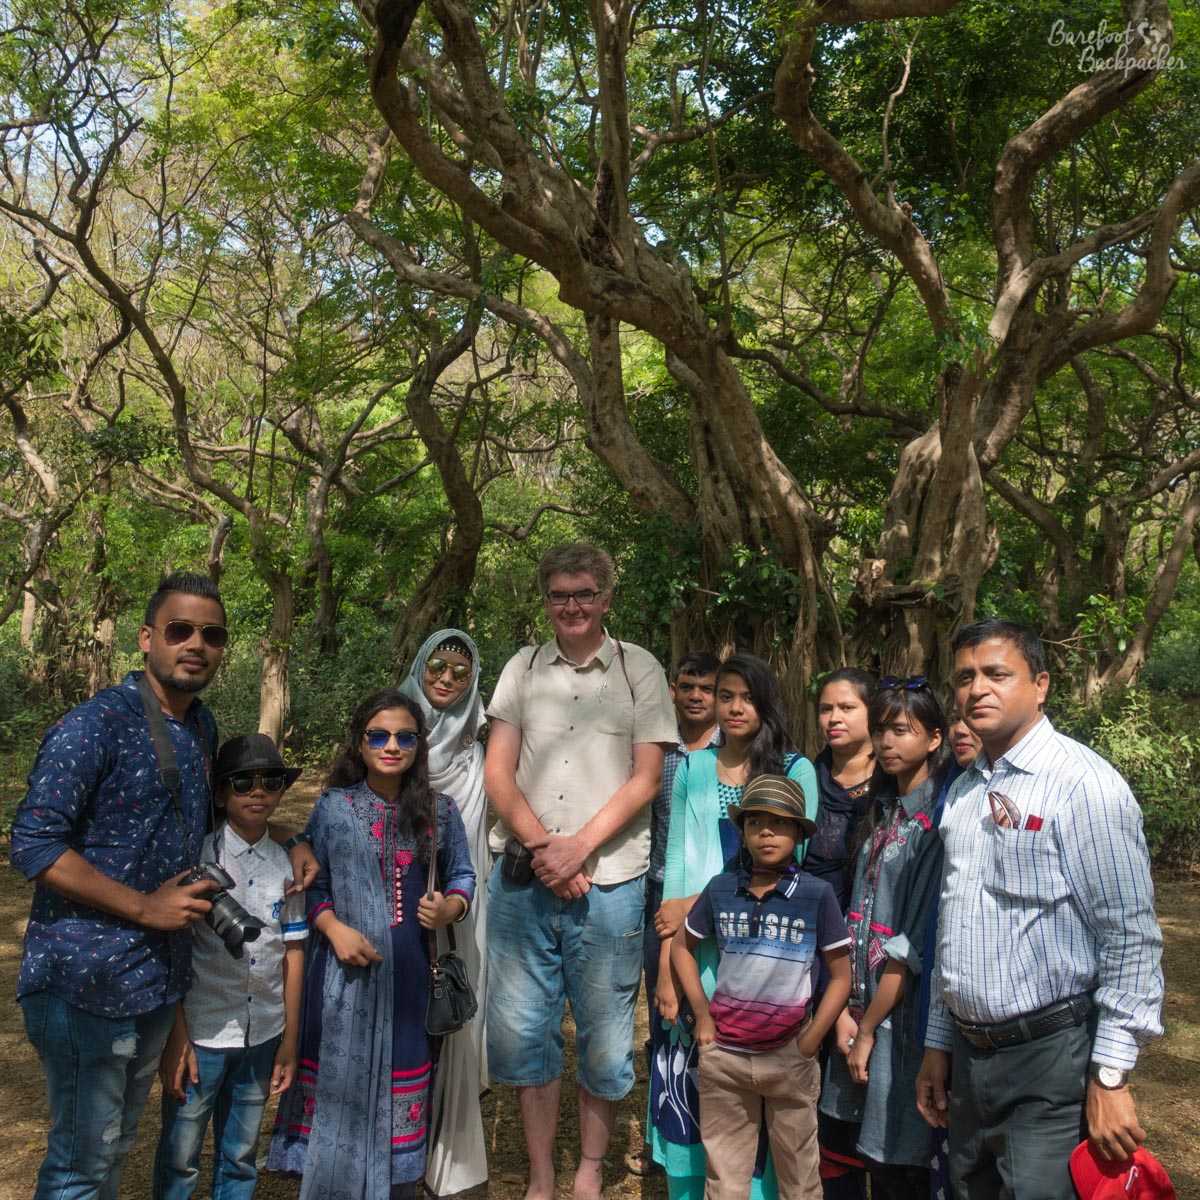 Several people stand in front of the camera with trees behind. I am in that group too, looking slightly awkward as I'm clearly out of place amongst a large Bangladeshi family.